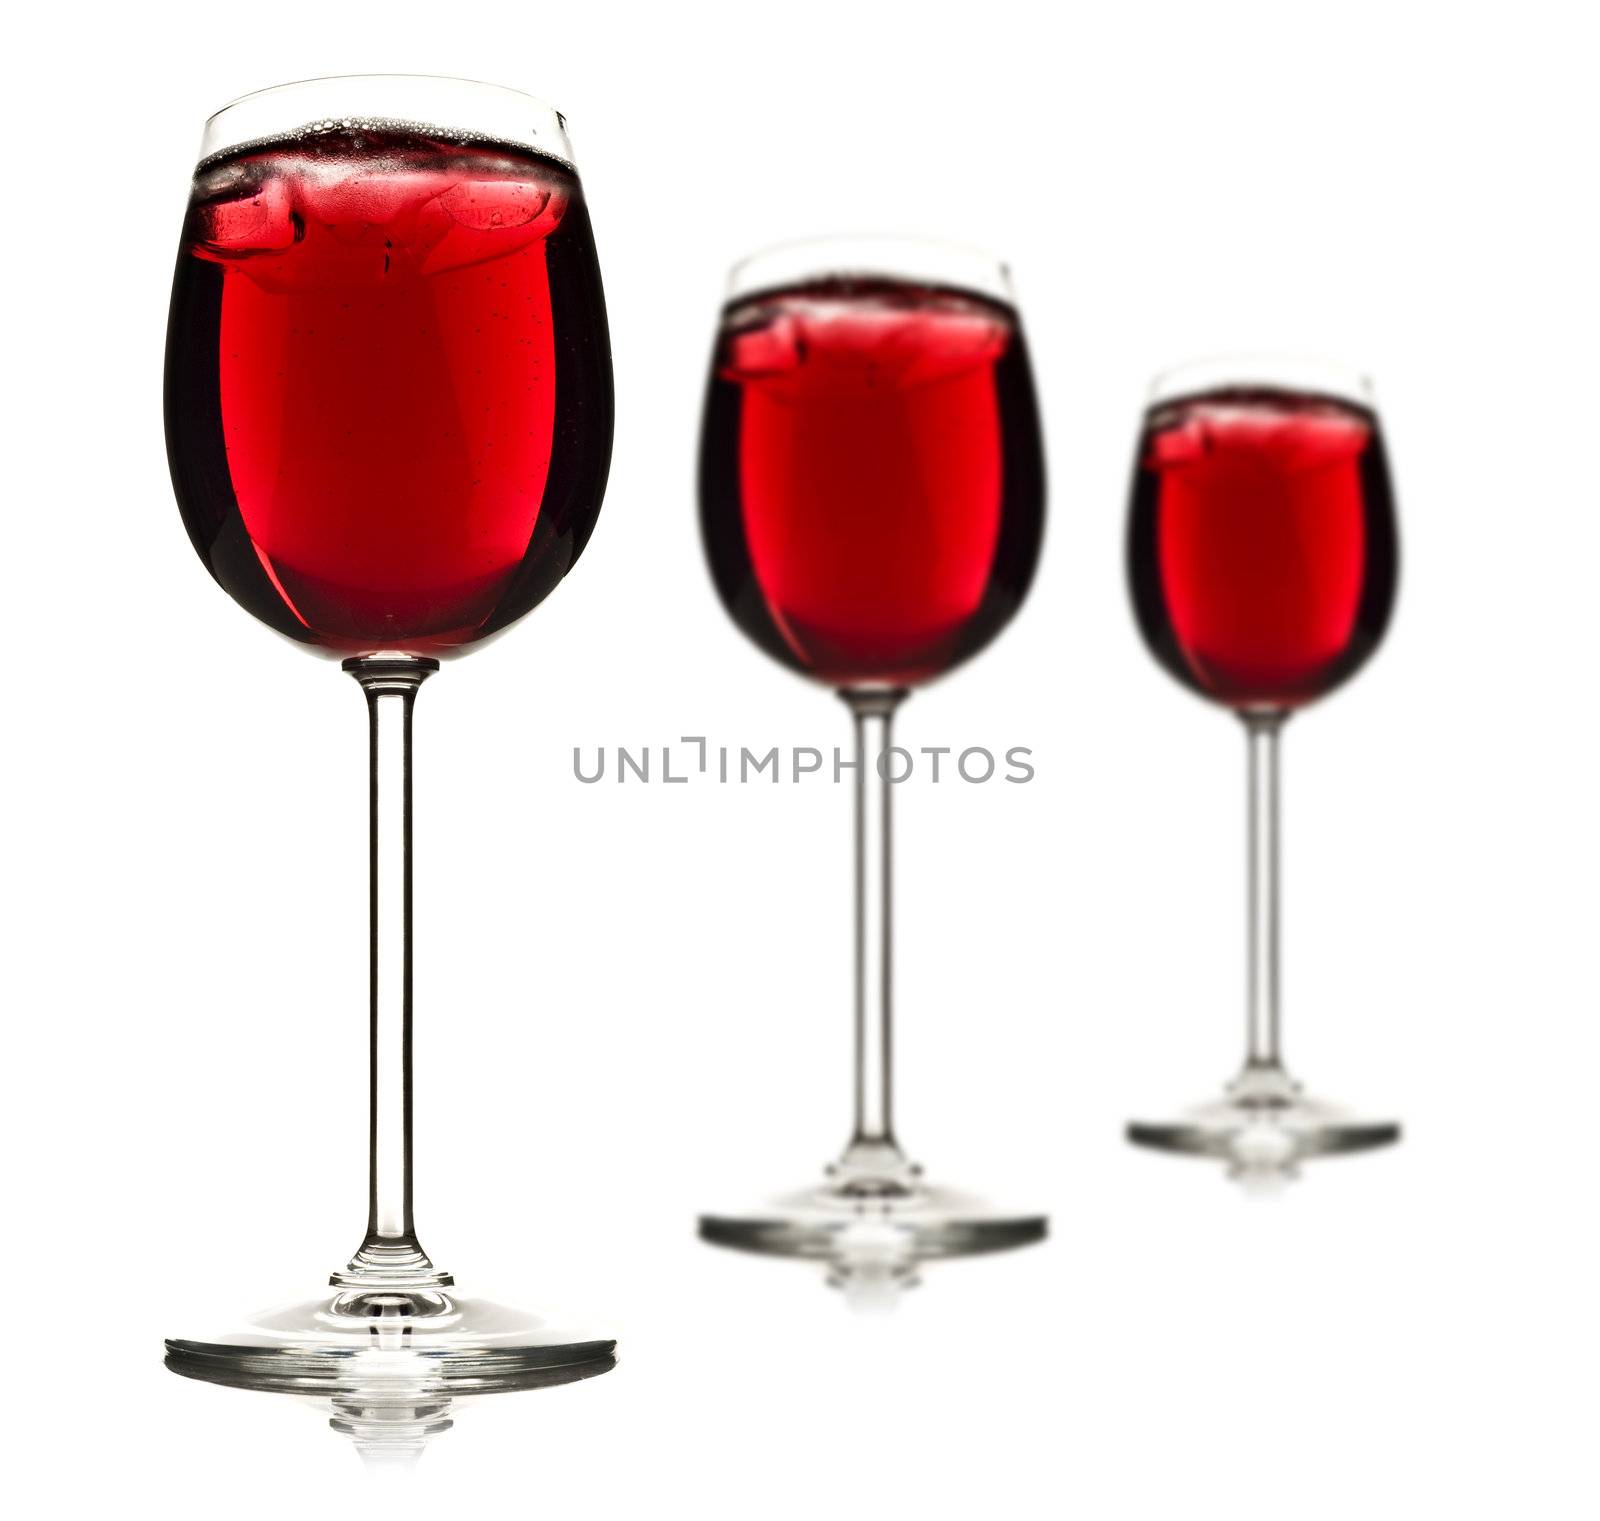 Three wine glasses with red fruit juice and ice - shallow depth of field